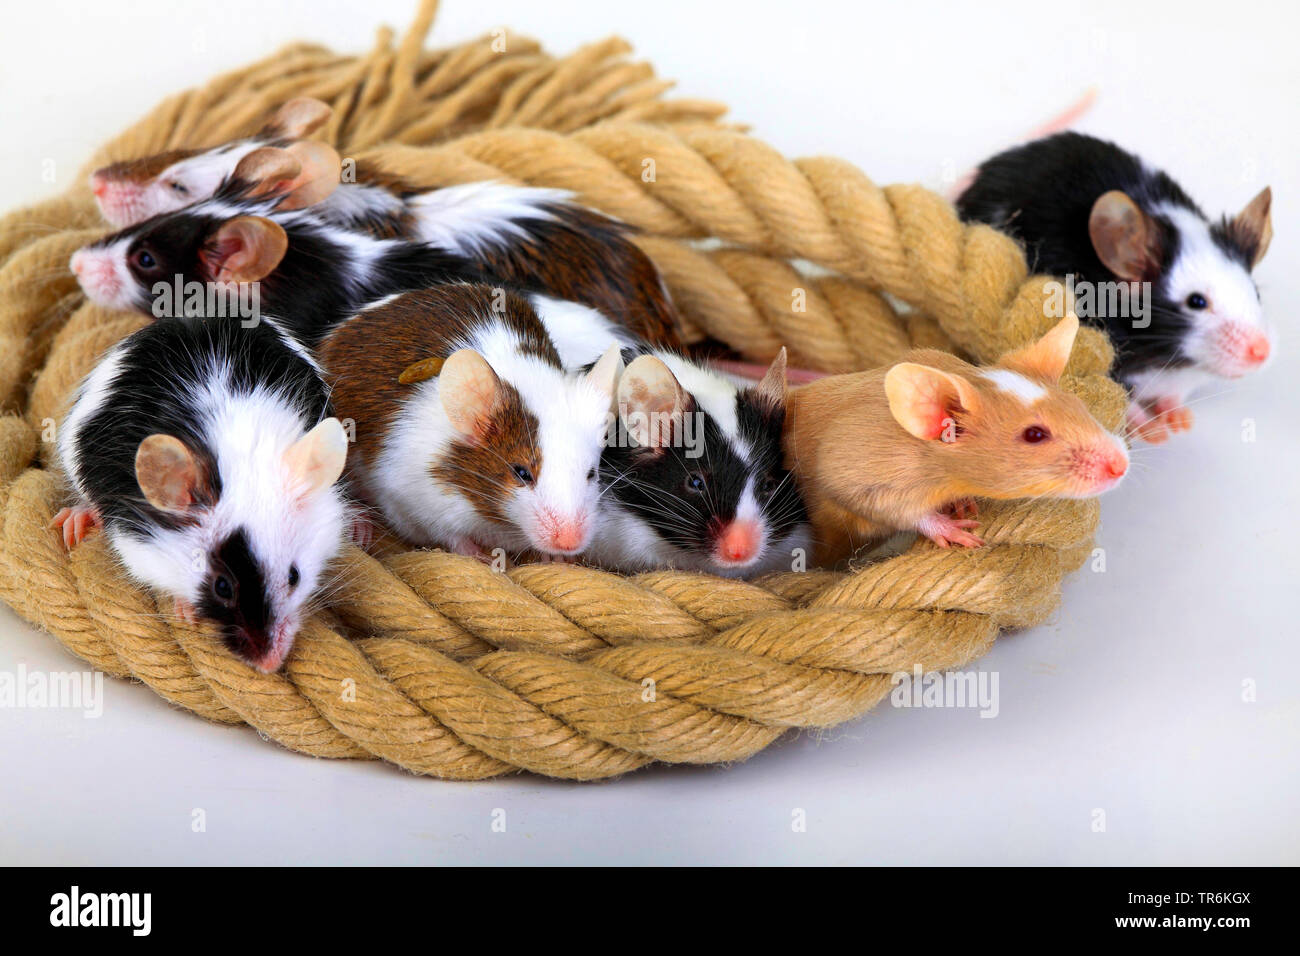 fancy mouse (Mus musculus), fancy mice cuddleing in a rope, Germany Stock Photo